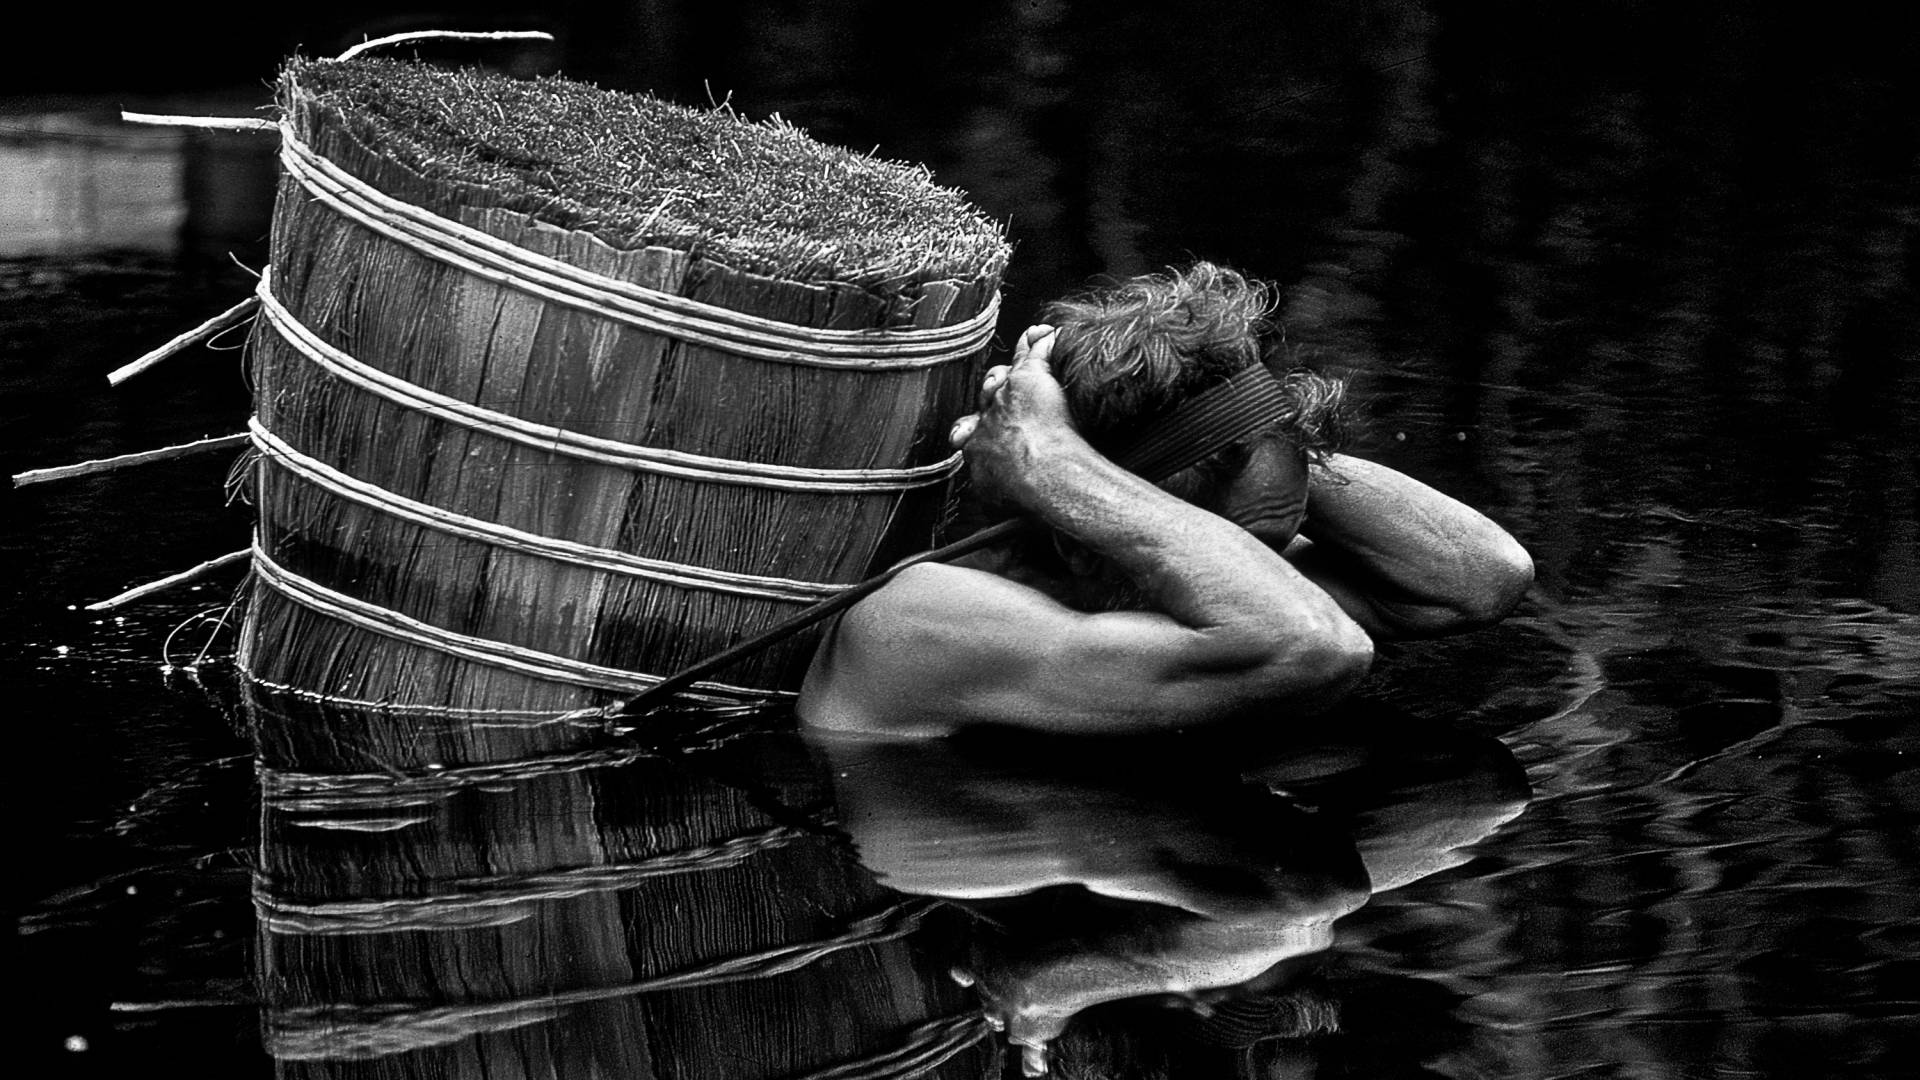 A man in water carying a barrel on his back